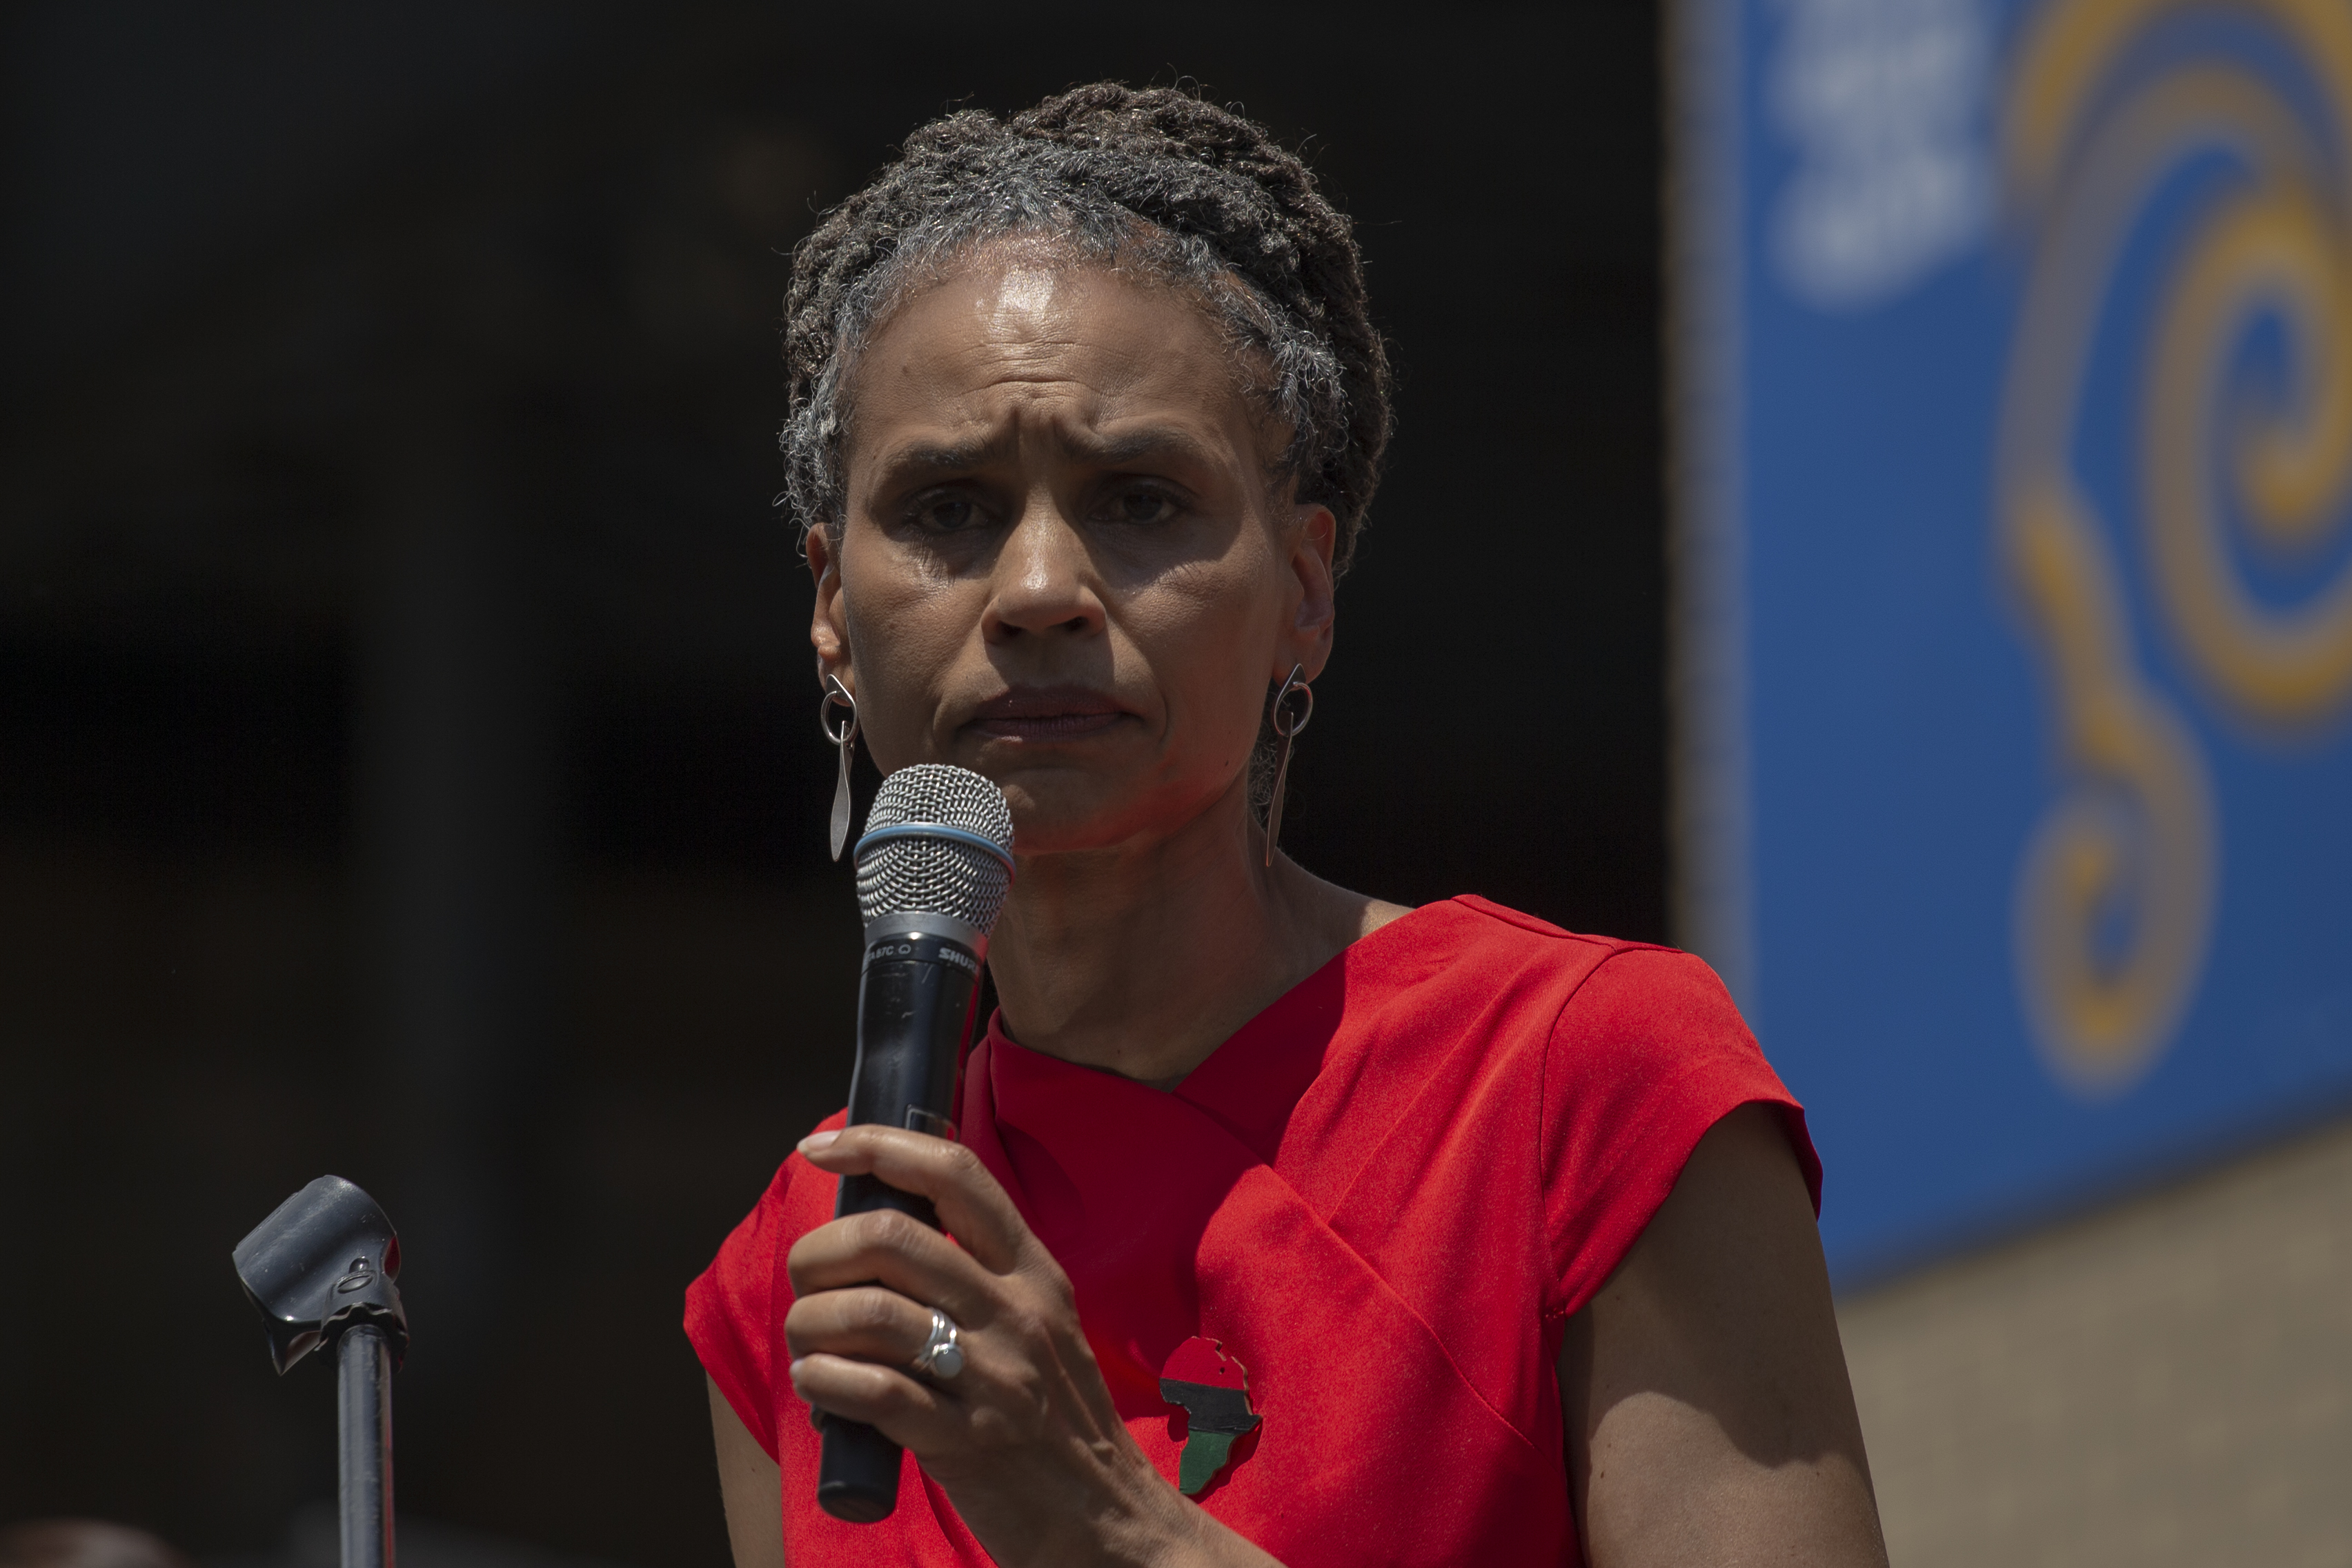 New York City mayoral candidate Maya Wiley speaks at the unveiling of a mural in Chinatown on June 20, 2021 in New York City. Kathryn Garcia and Andrew Yang also attended the event in the lead-up to primary Election Day on June 22.